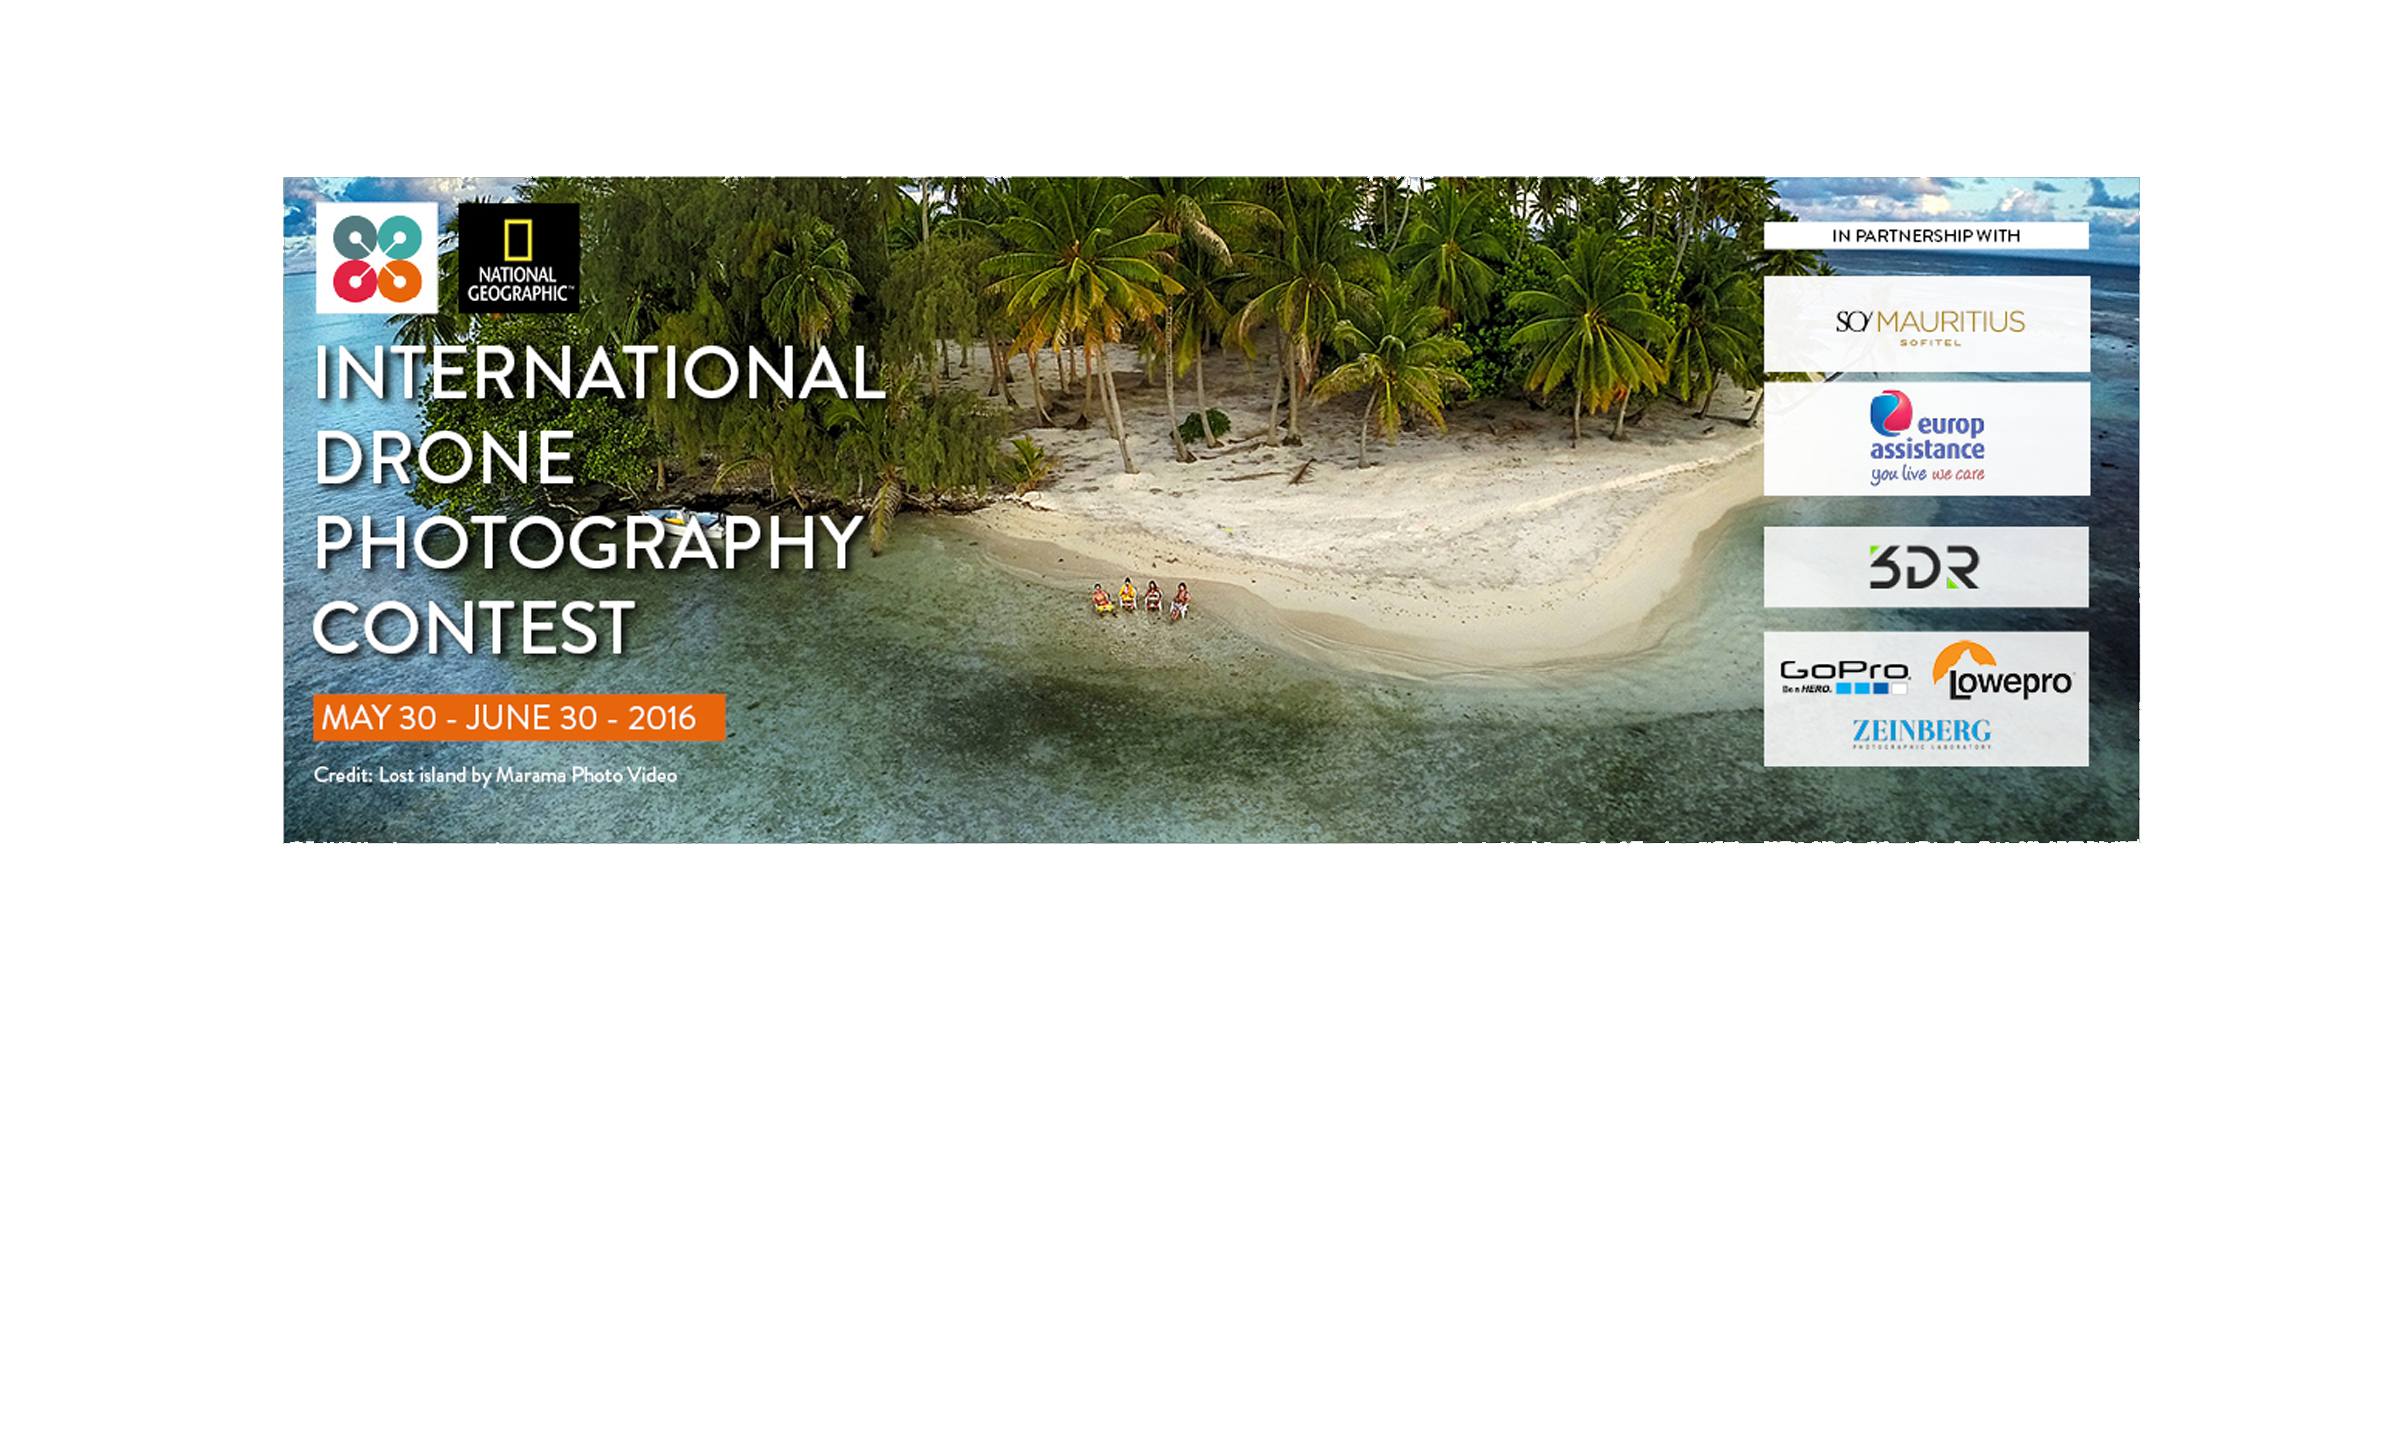 Intl. Drone Photography Contest